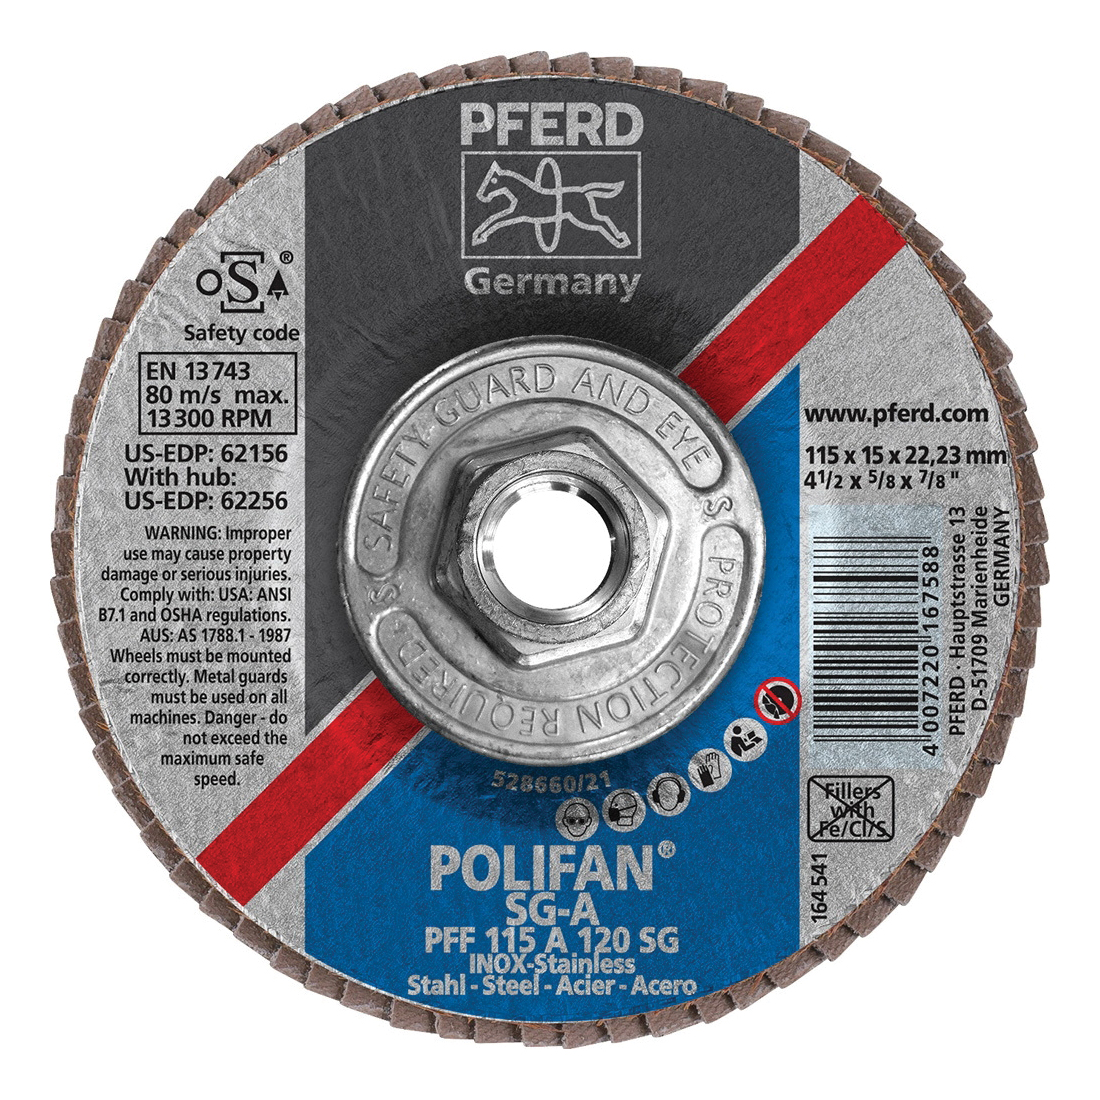 PFERD Polifan® 62256 Performance Line SG A Threaded Coated Abrasive Flap Disc, 4-1/2 in Dia, 120 Grit, Aluminum Oxide Abrasive, Type 27 Flat Disc